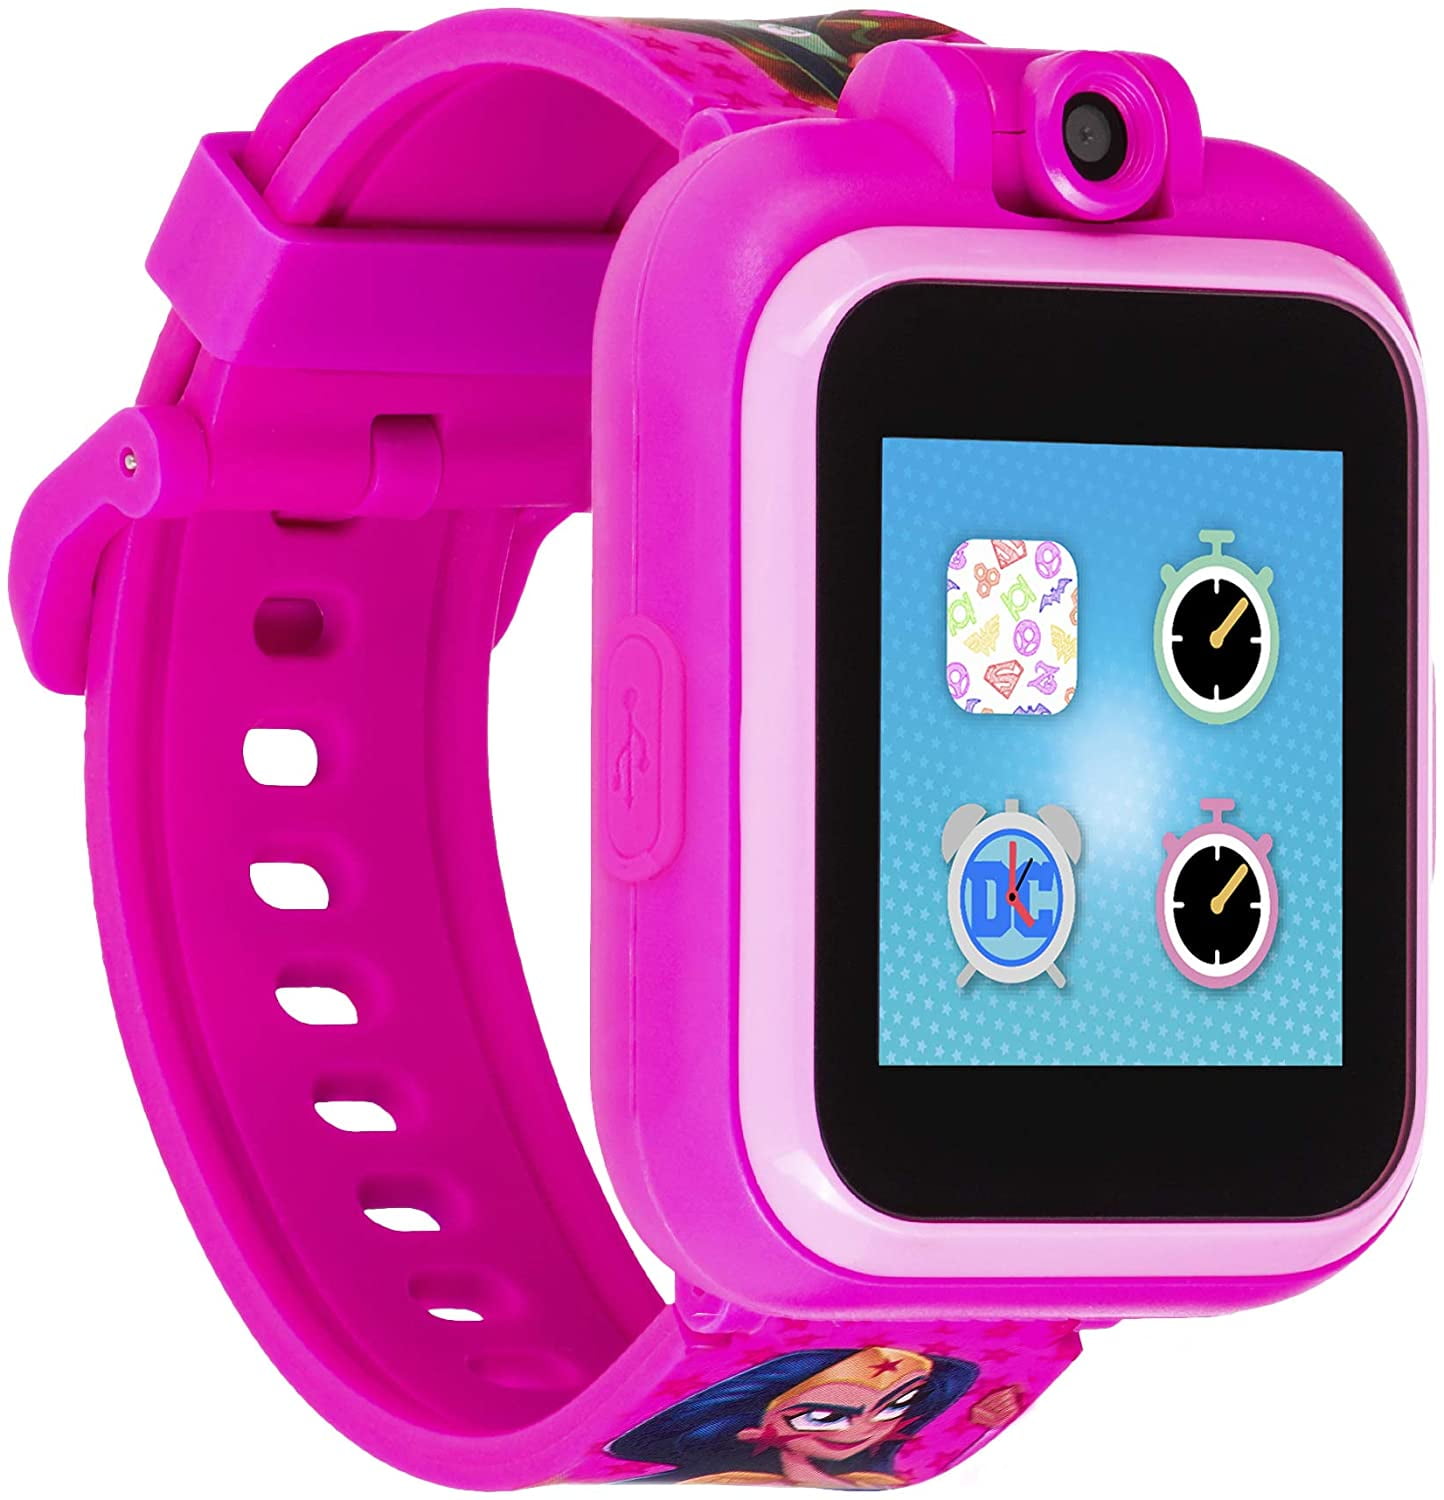 Take quality videos customize pictures and selfies Details about   KidiZoom Smartwatch DX2 